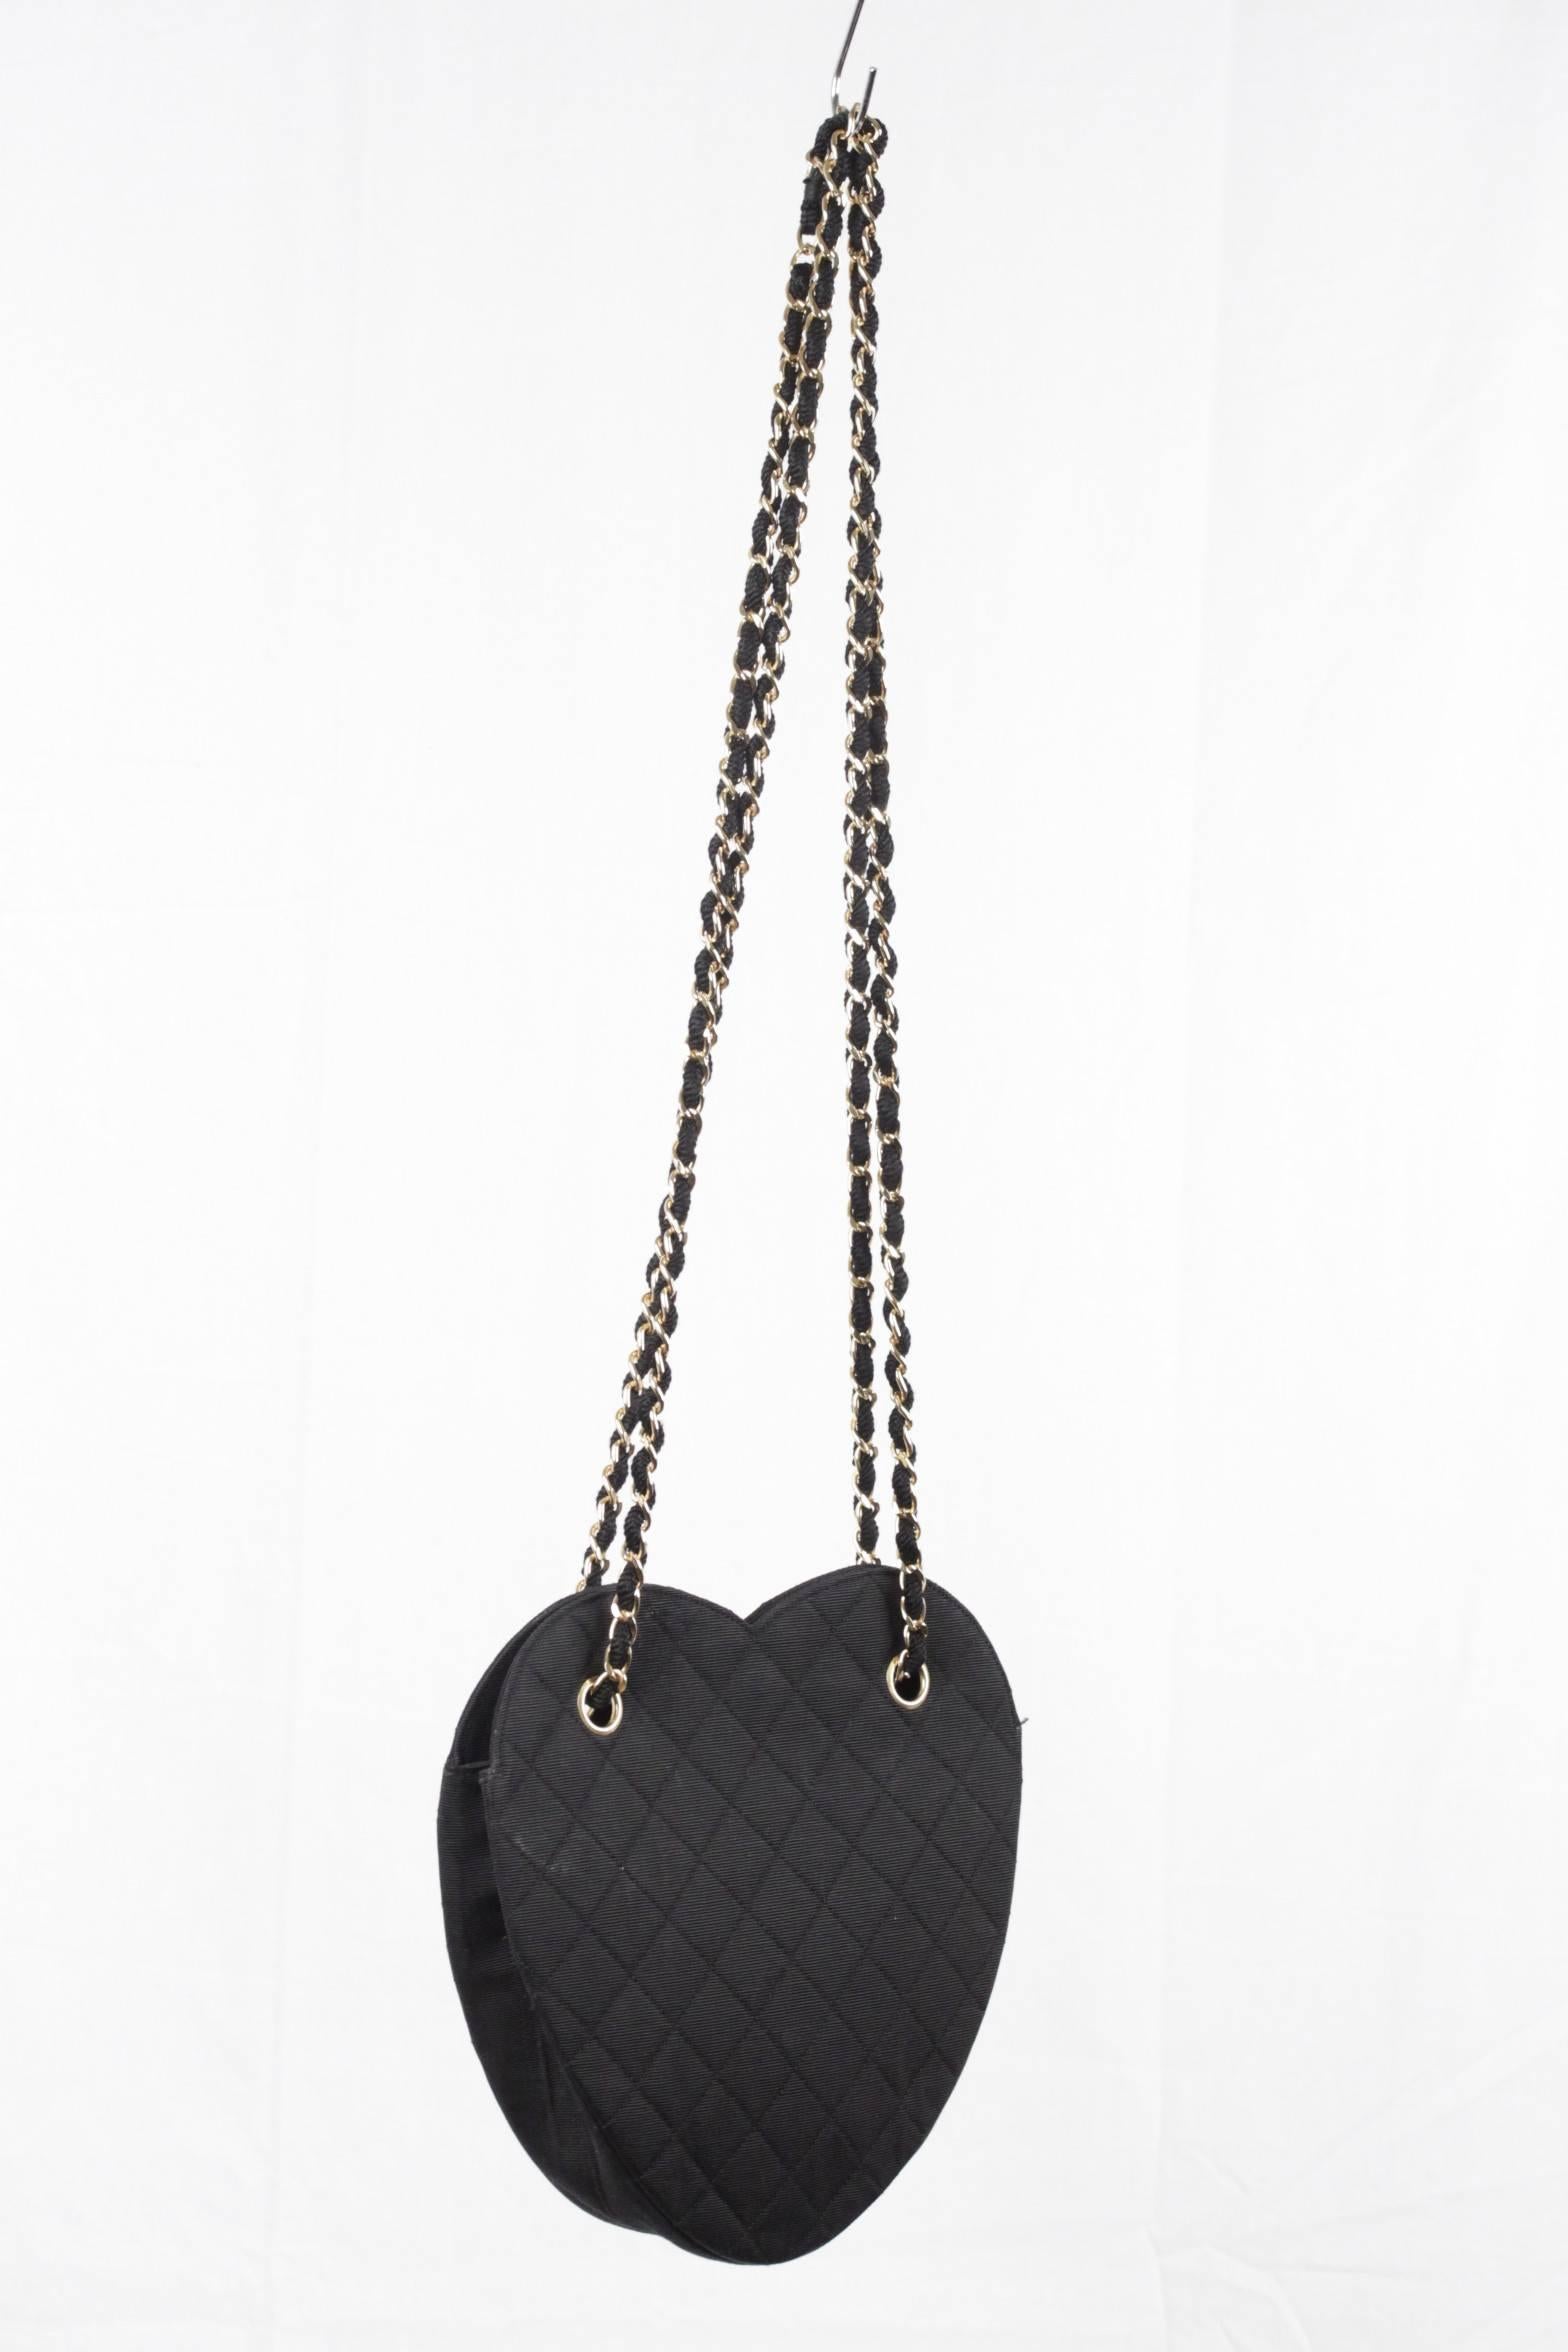 CHANEL Vintage Black Quilted Fabric HEART SHAPED MESSENGER BAG Rare In Good Condition In Rome, Rome